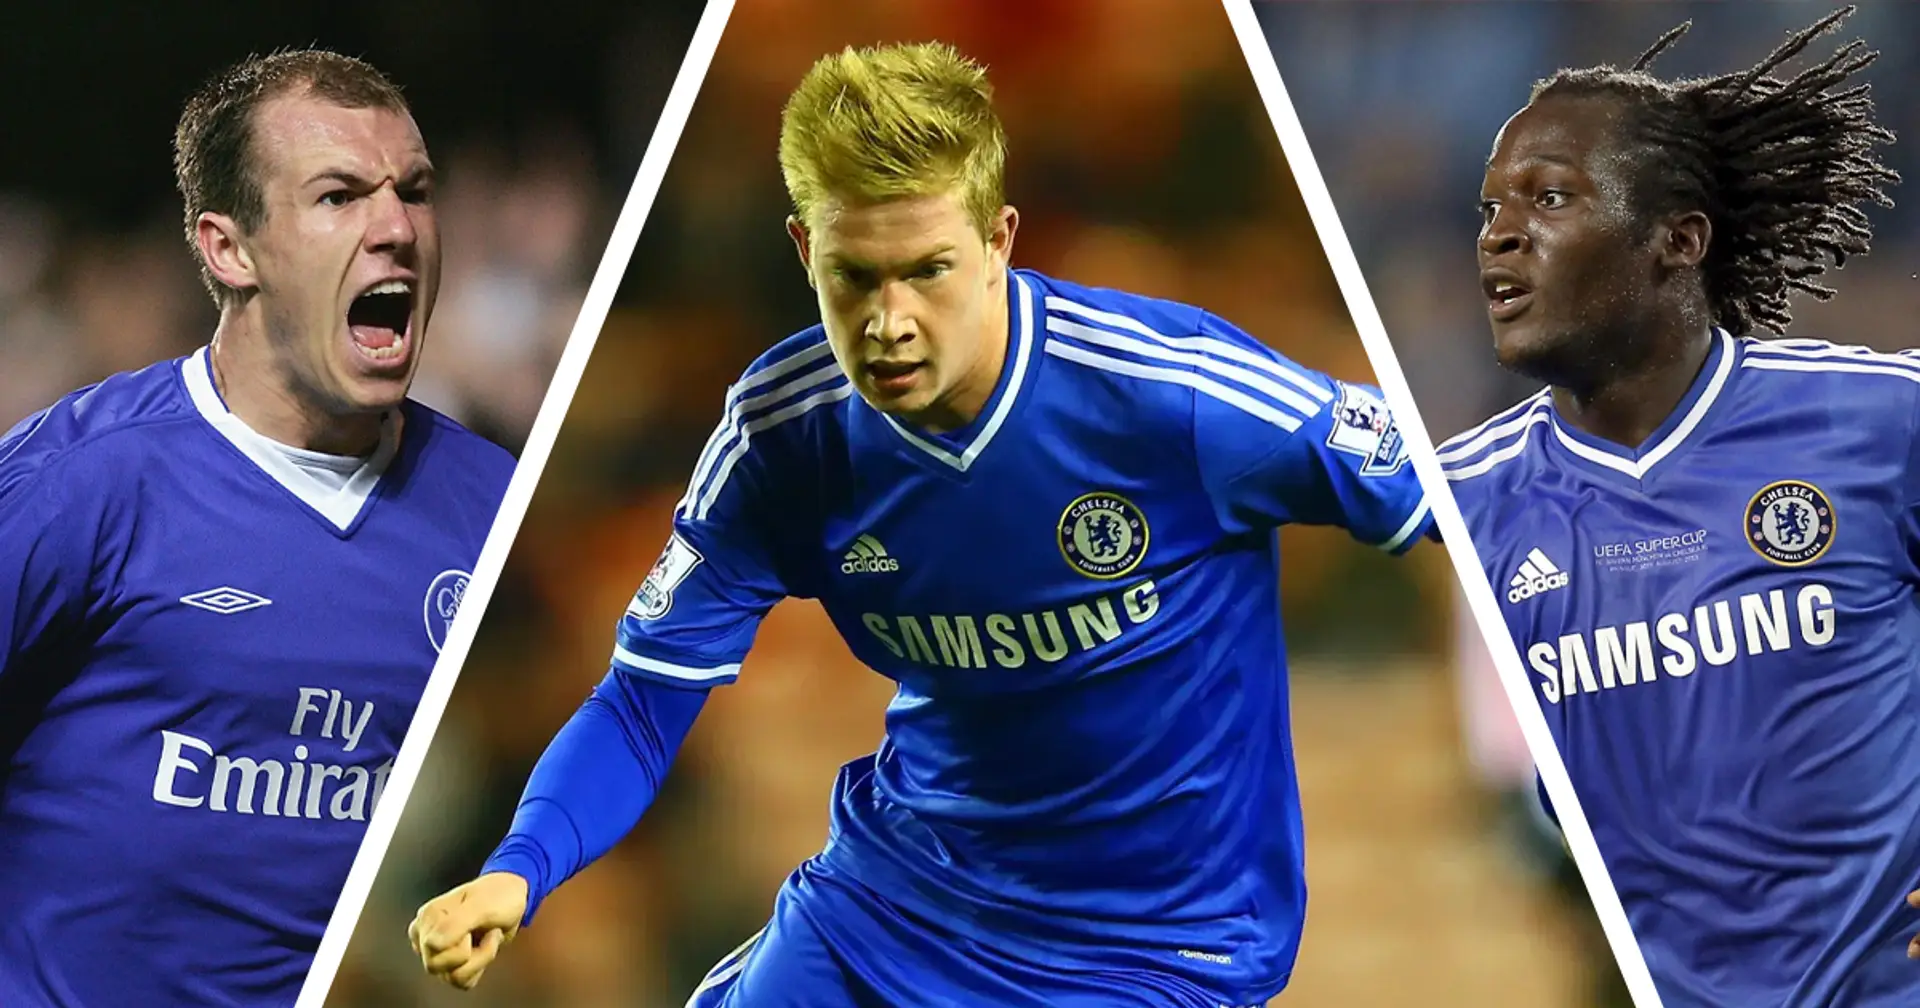 6 players who could've been Chelsea legends but ended up leaving Stamford Bridge